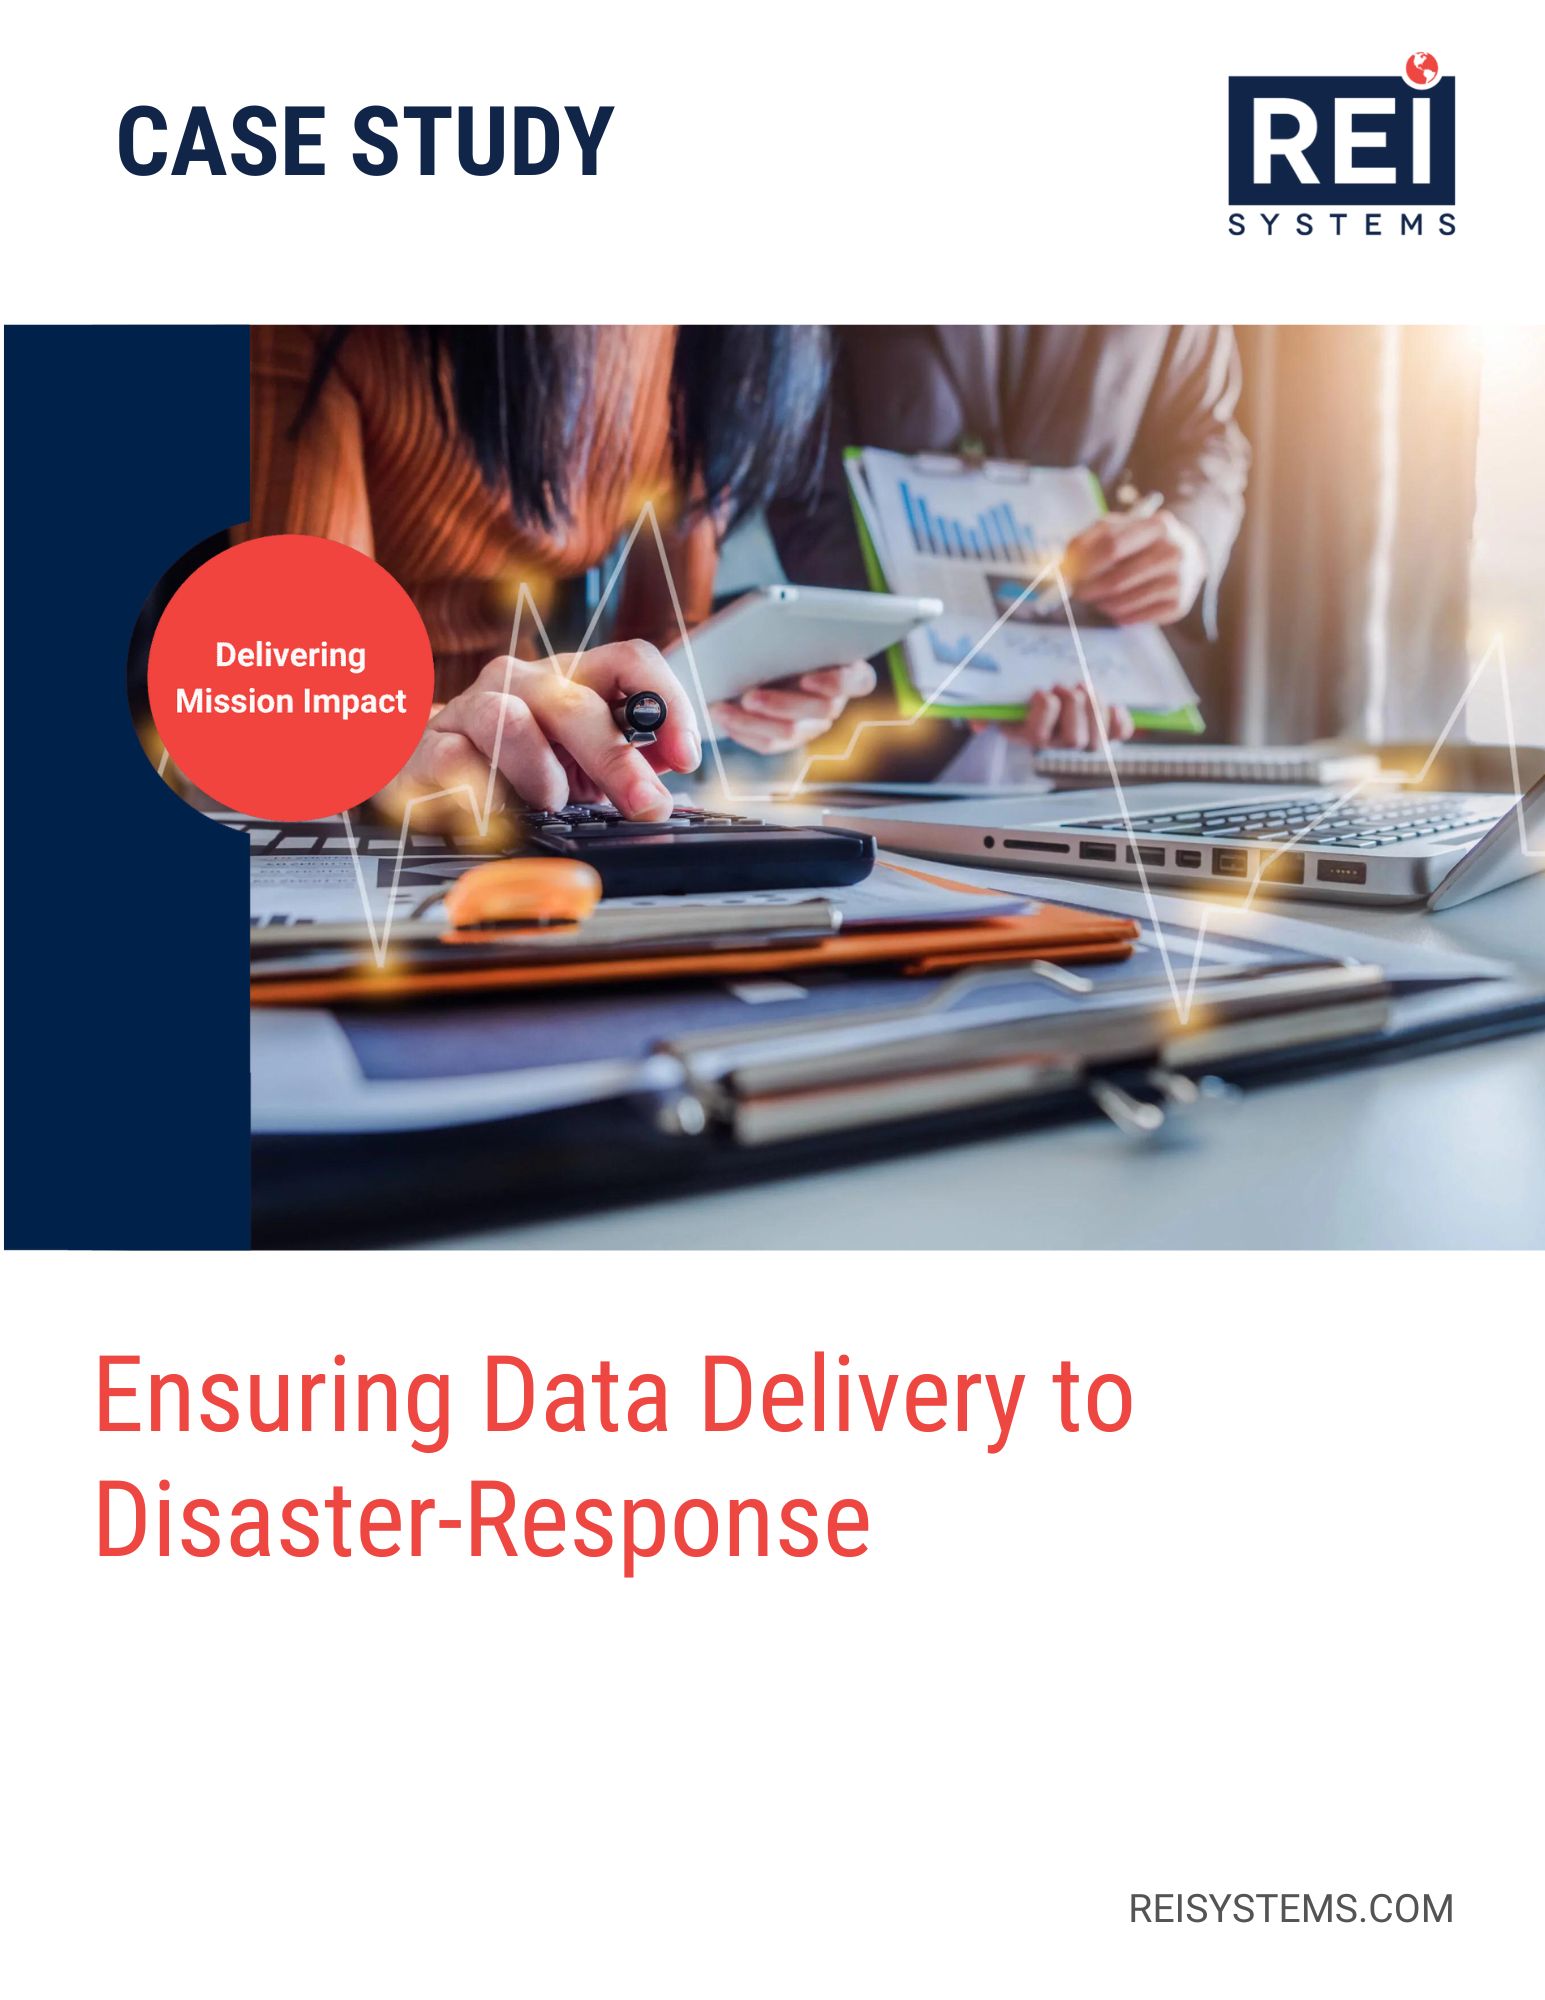 Ensuring Data Delivery to Disaster-Response